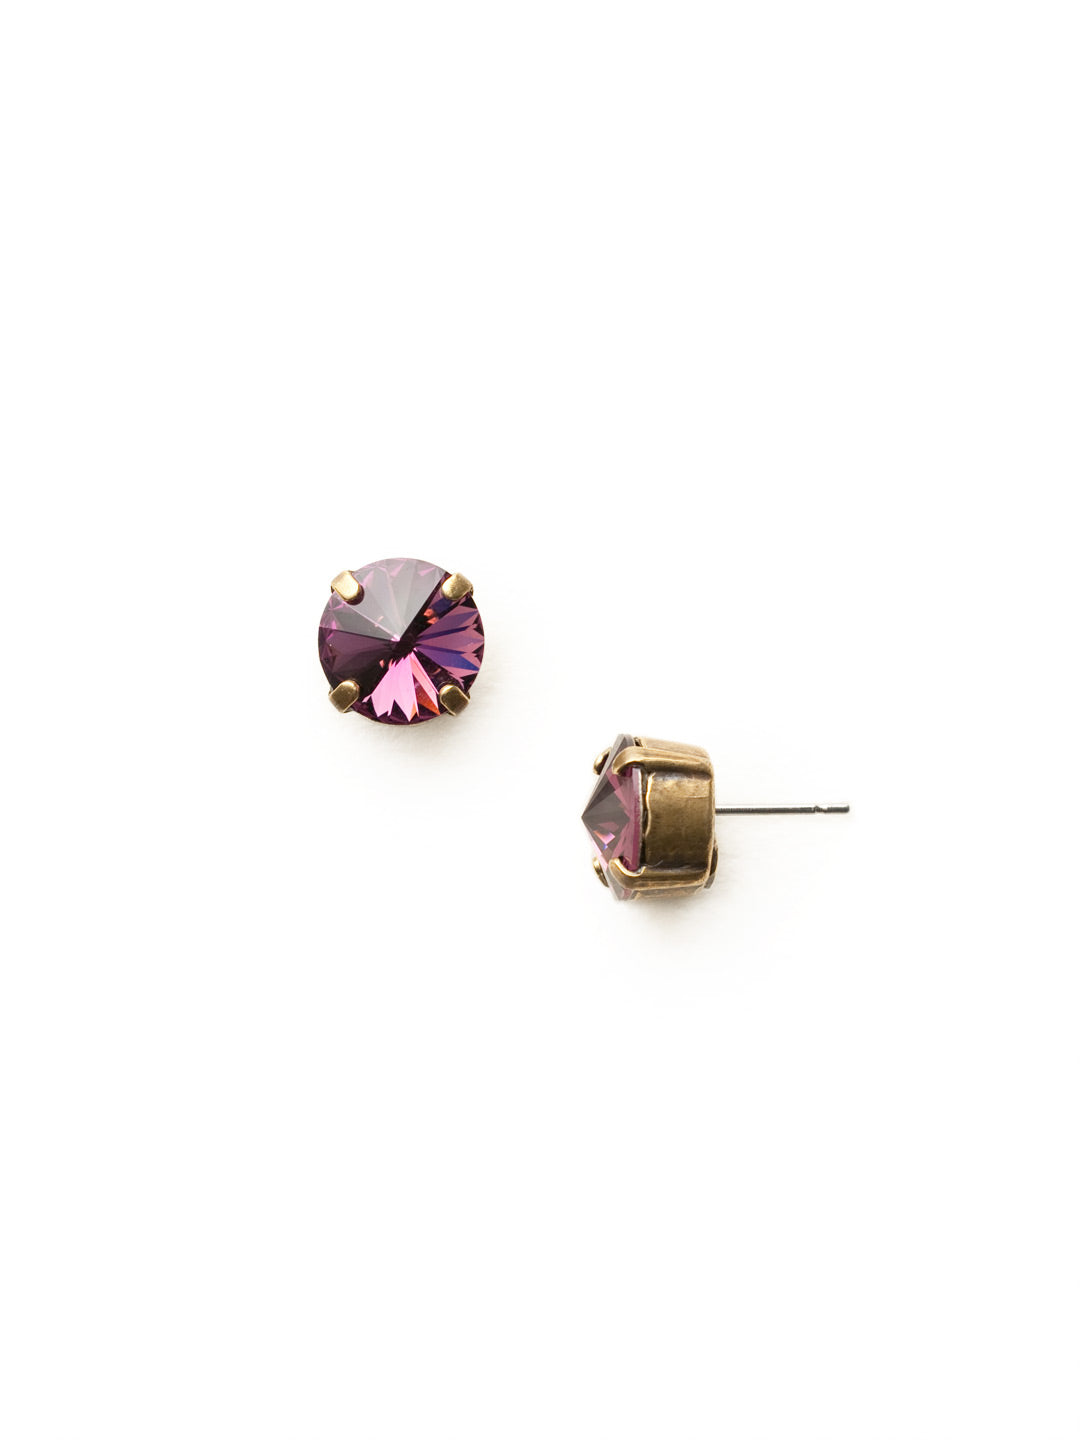 London Stud Earrings - ECM14AGAM - <p>Everyone needs a great pair of studs. Add some classic sparkle to any occasion with these stud earrings. Need help picking a stud? <a href="https://www.sorrelli.com/blogs/sisterhood/round-stud-earrings-101-a-rundown-of-sizes-styles-and-sparkle">Check out our size guide!</a> From Sorrelli's Amethyst collection in our Antique Gold-tone finish.</p>